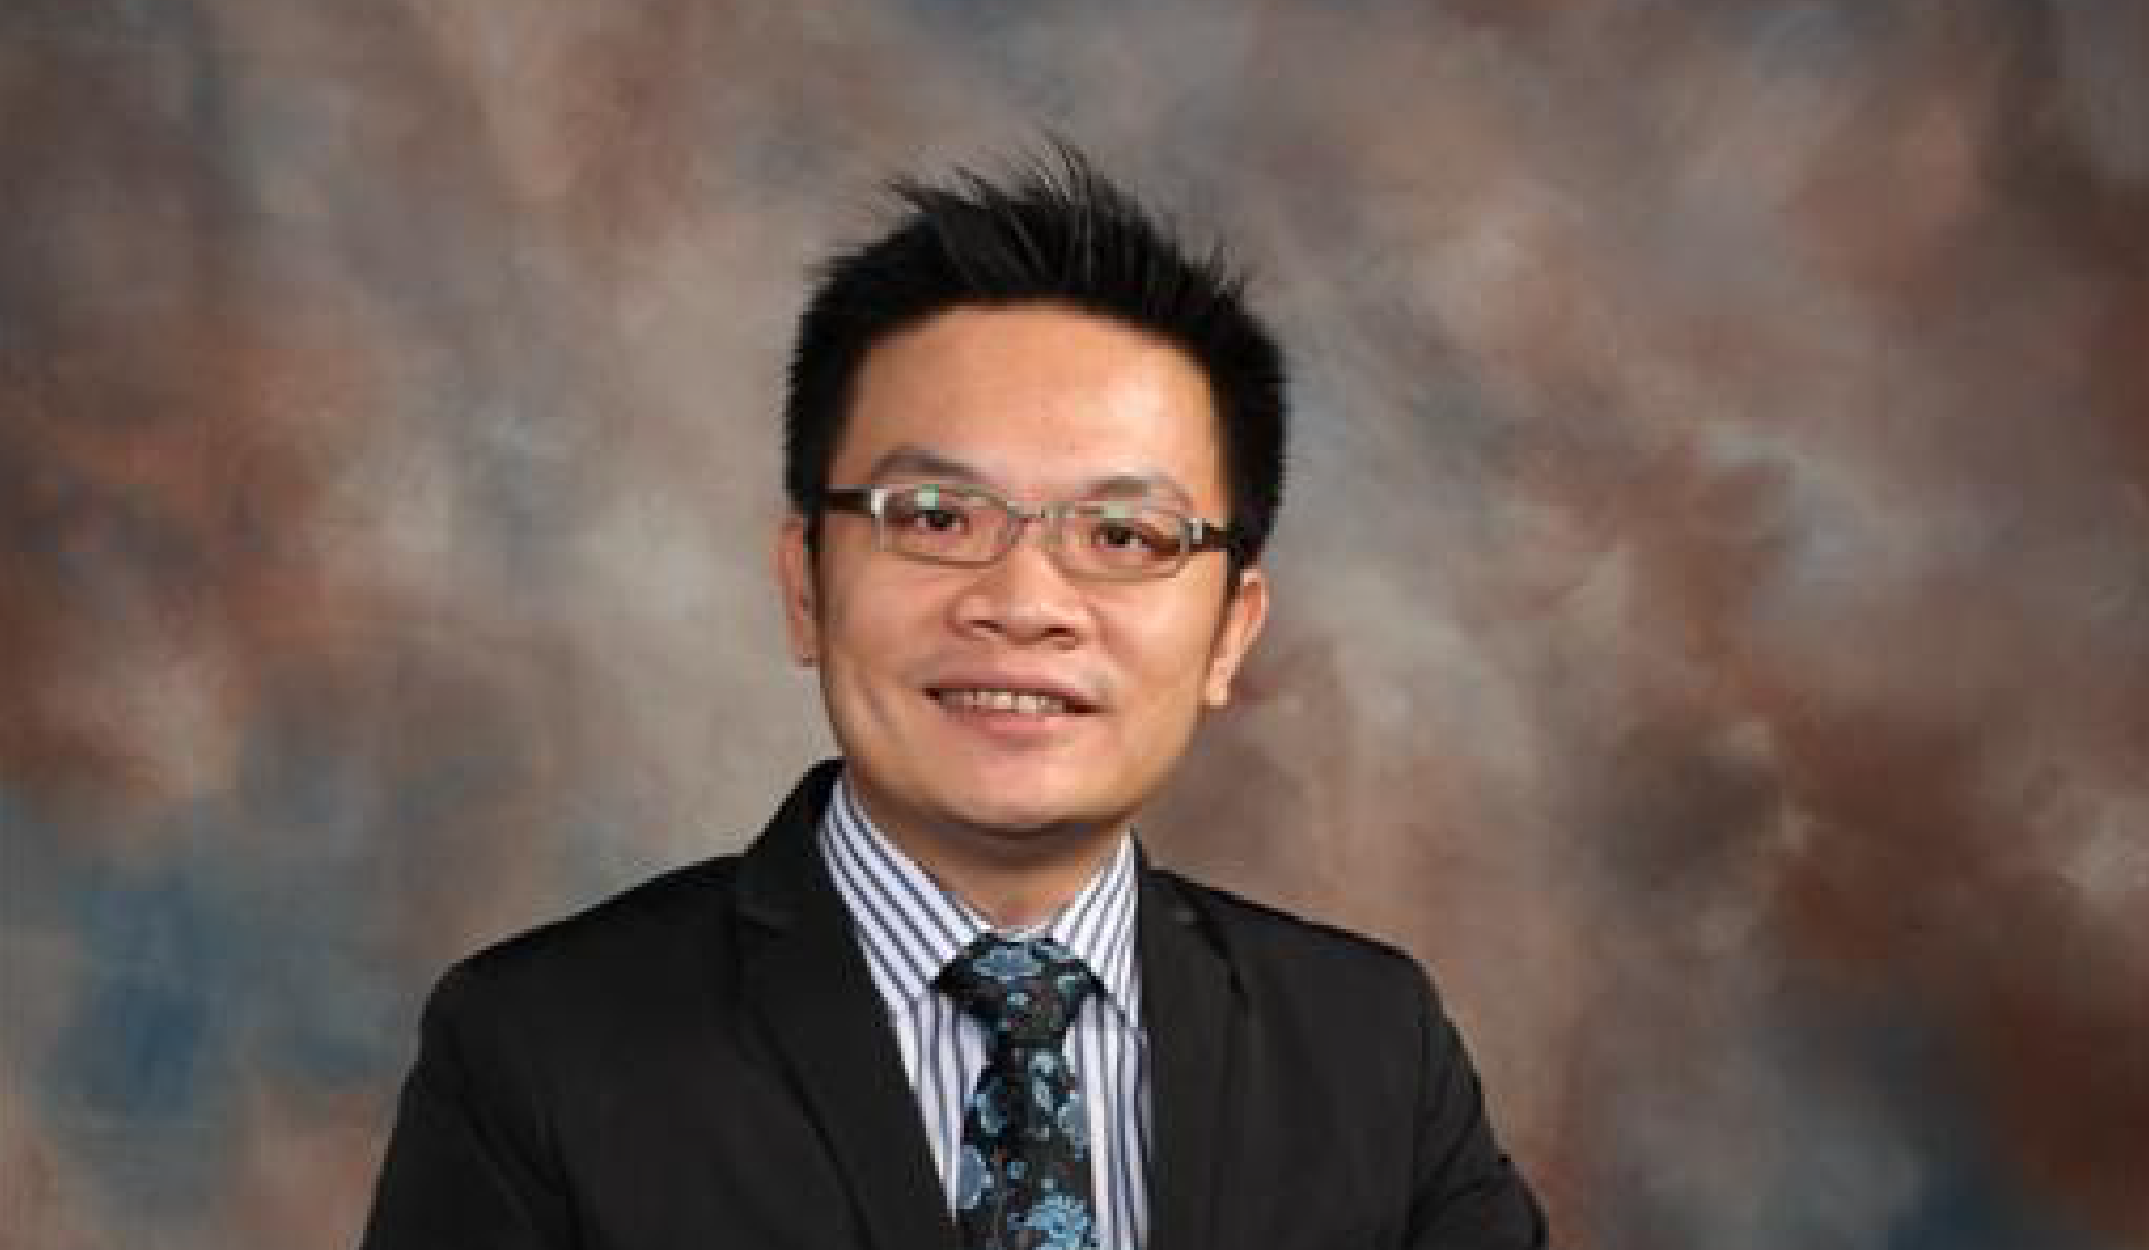 Dr. Jenson Goh, Adjunct Professor of Enterprise Architecture and Systems Thinking